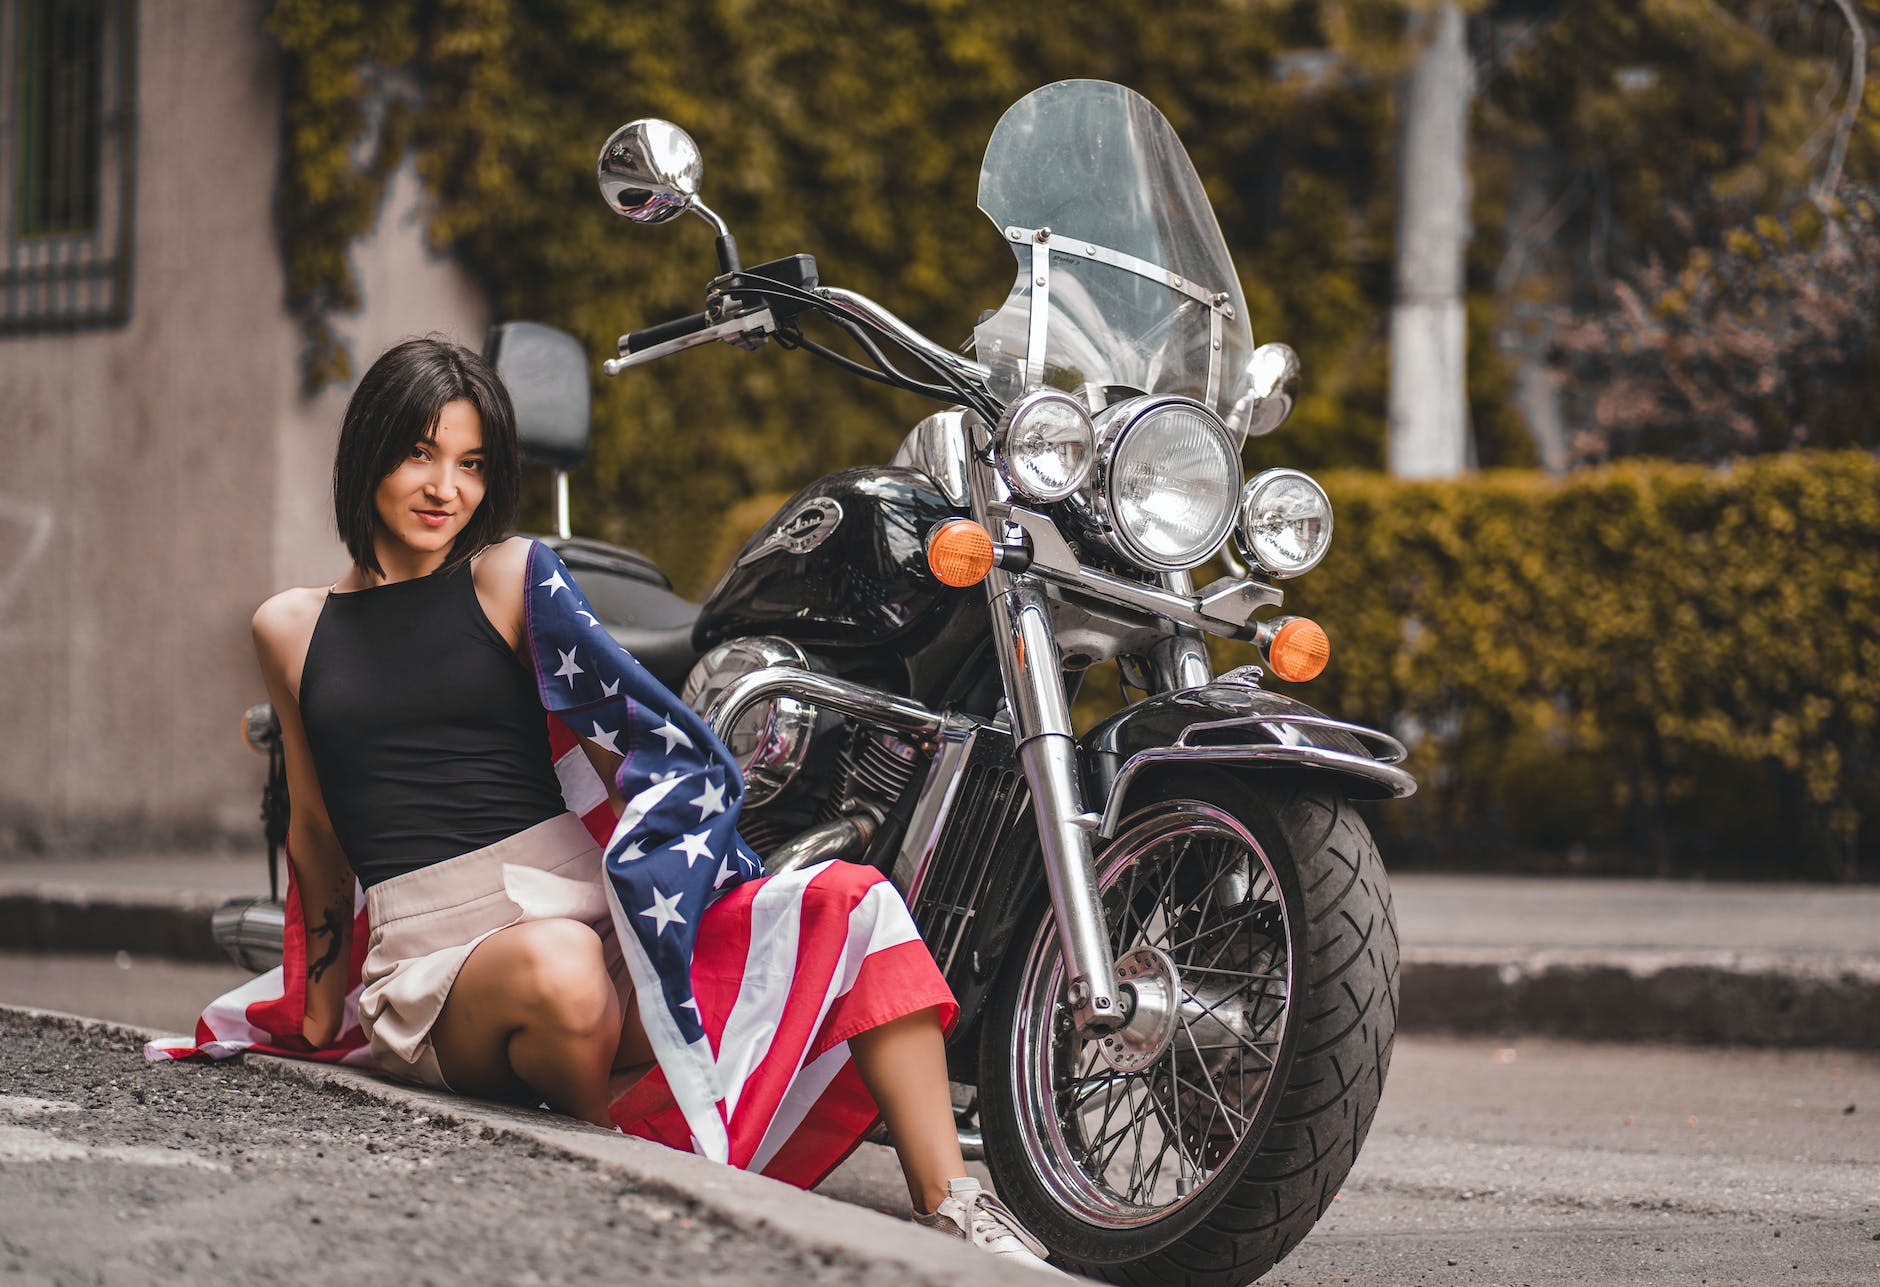 Motorcycle Licences in the US